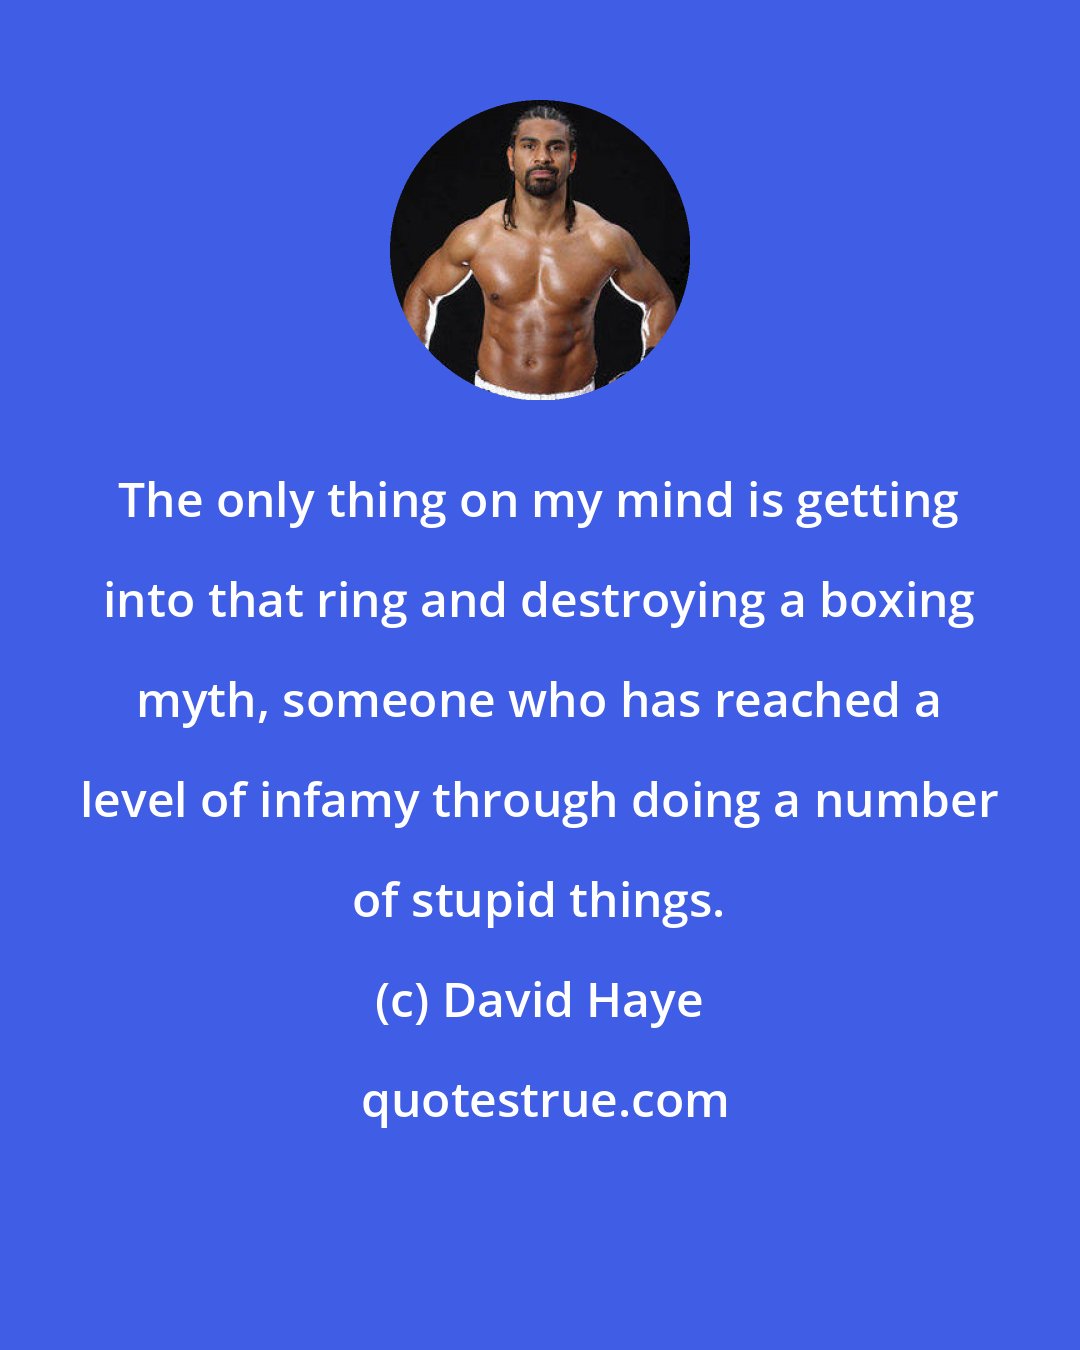 David Haye: The only thing on my mind is getting into that ring and destroying a boxing myth, someone who has reached a level of infamy through doing a number of stupid things.